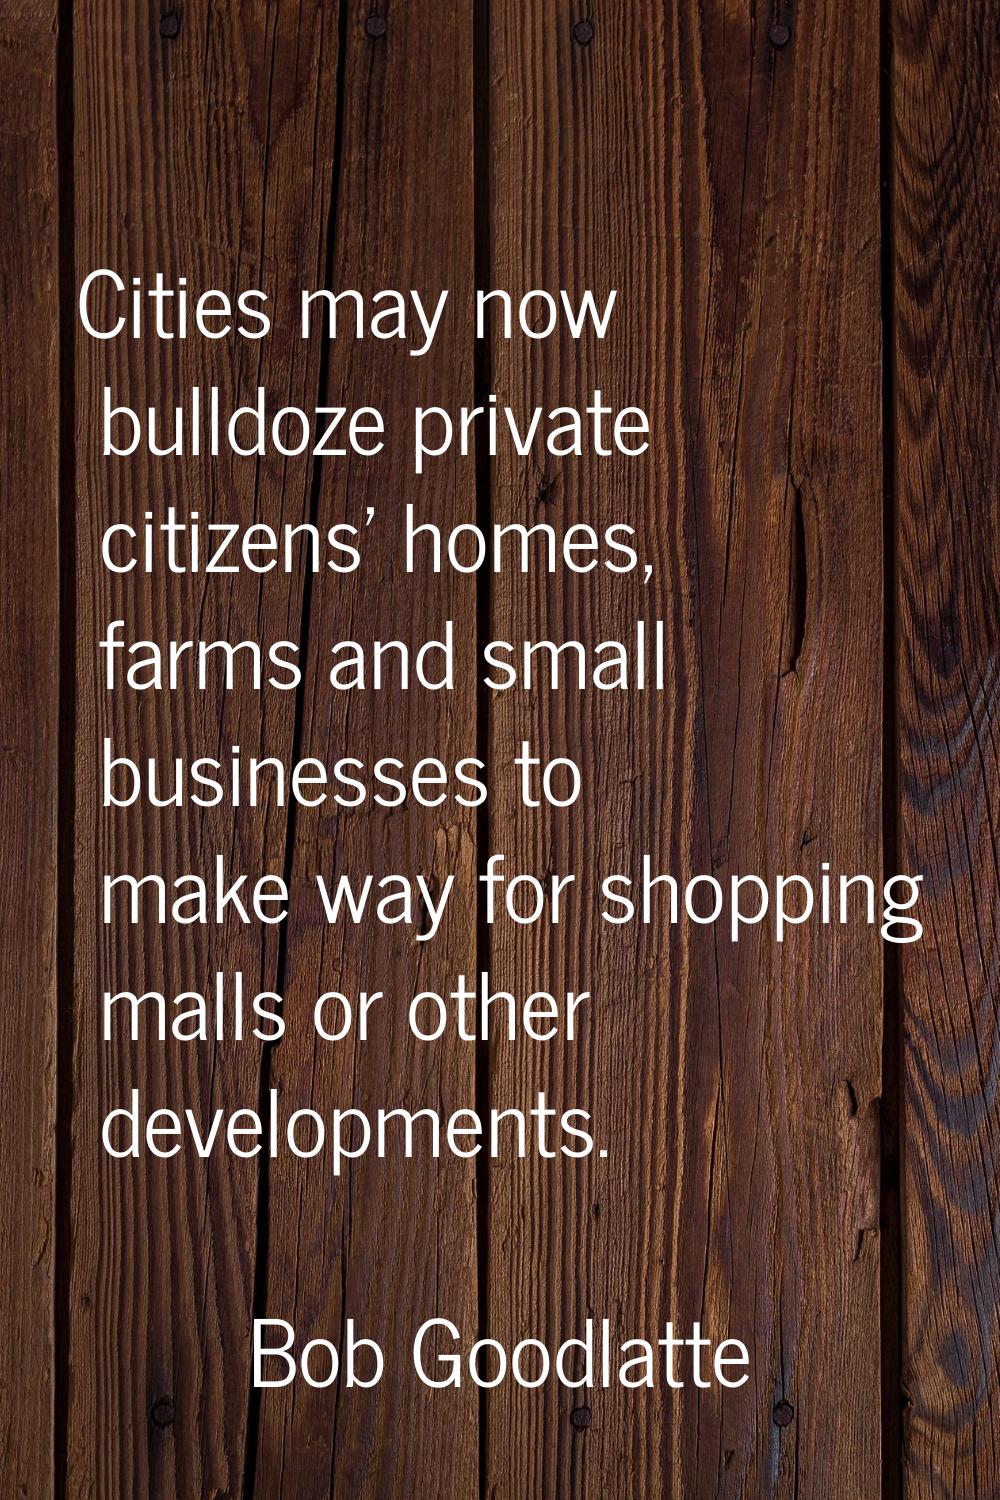 Cities may now bulldoze private citizens' homes, farms and small businesses to make way for shoppin